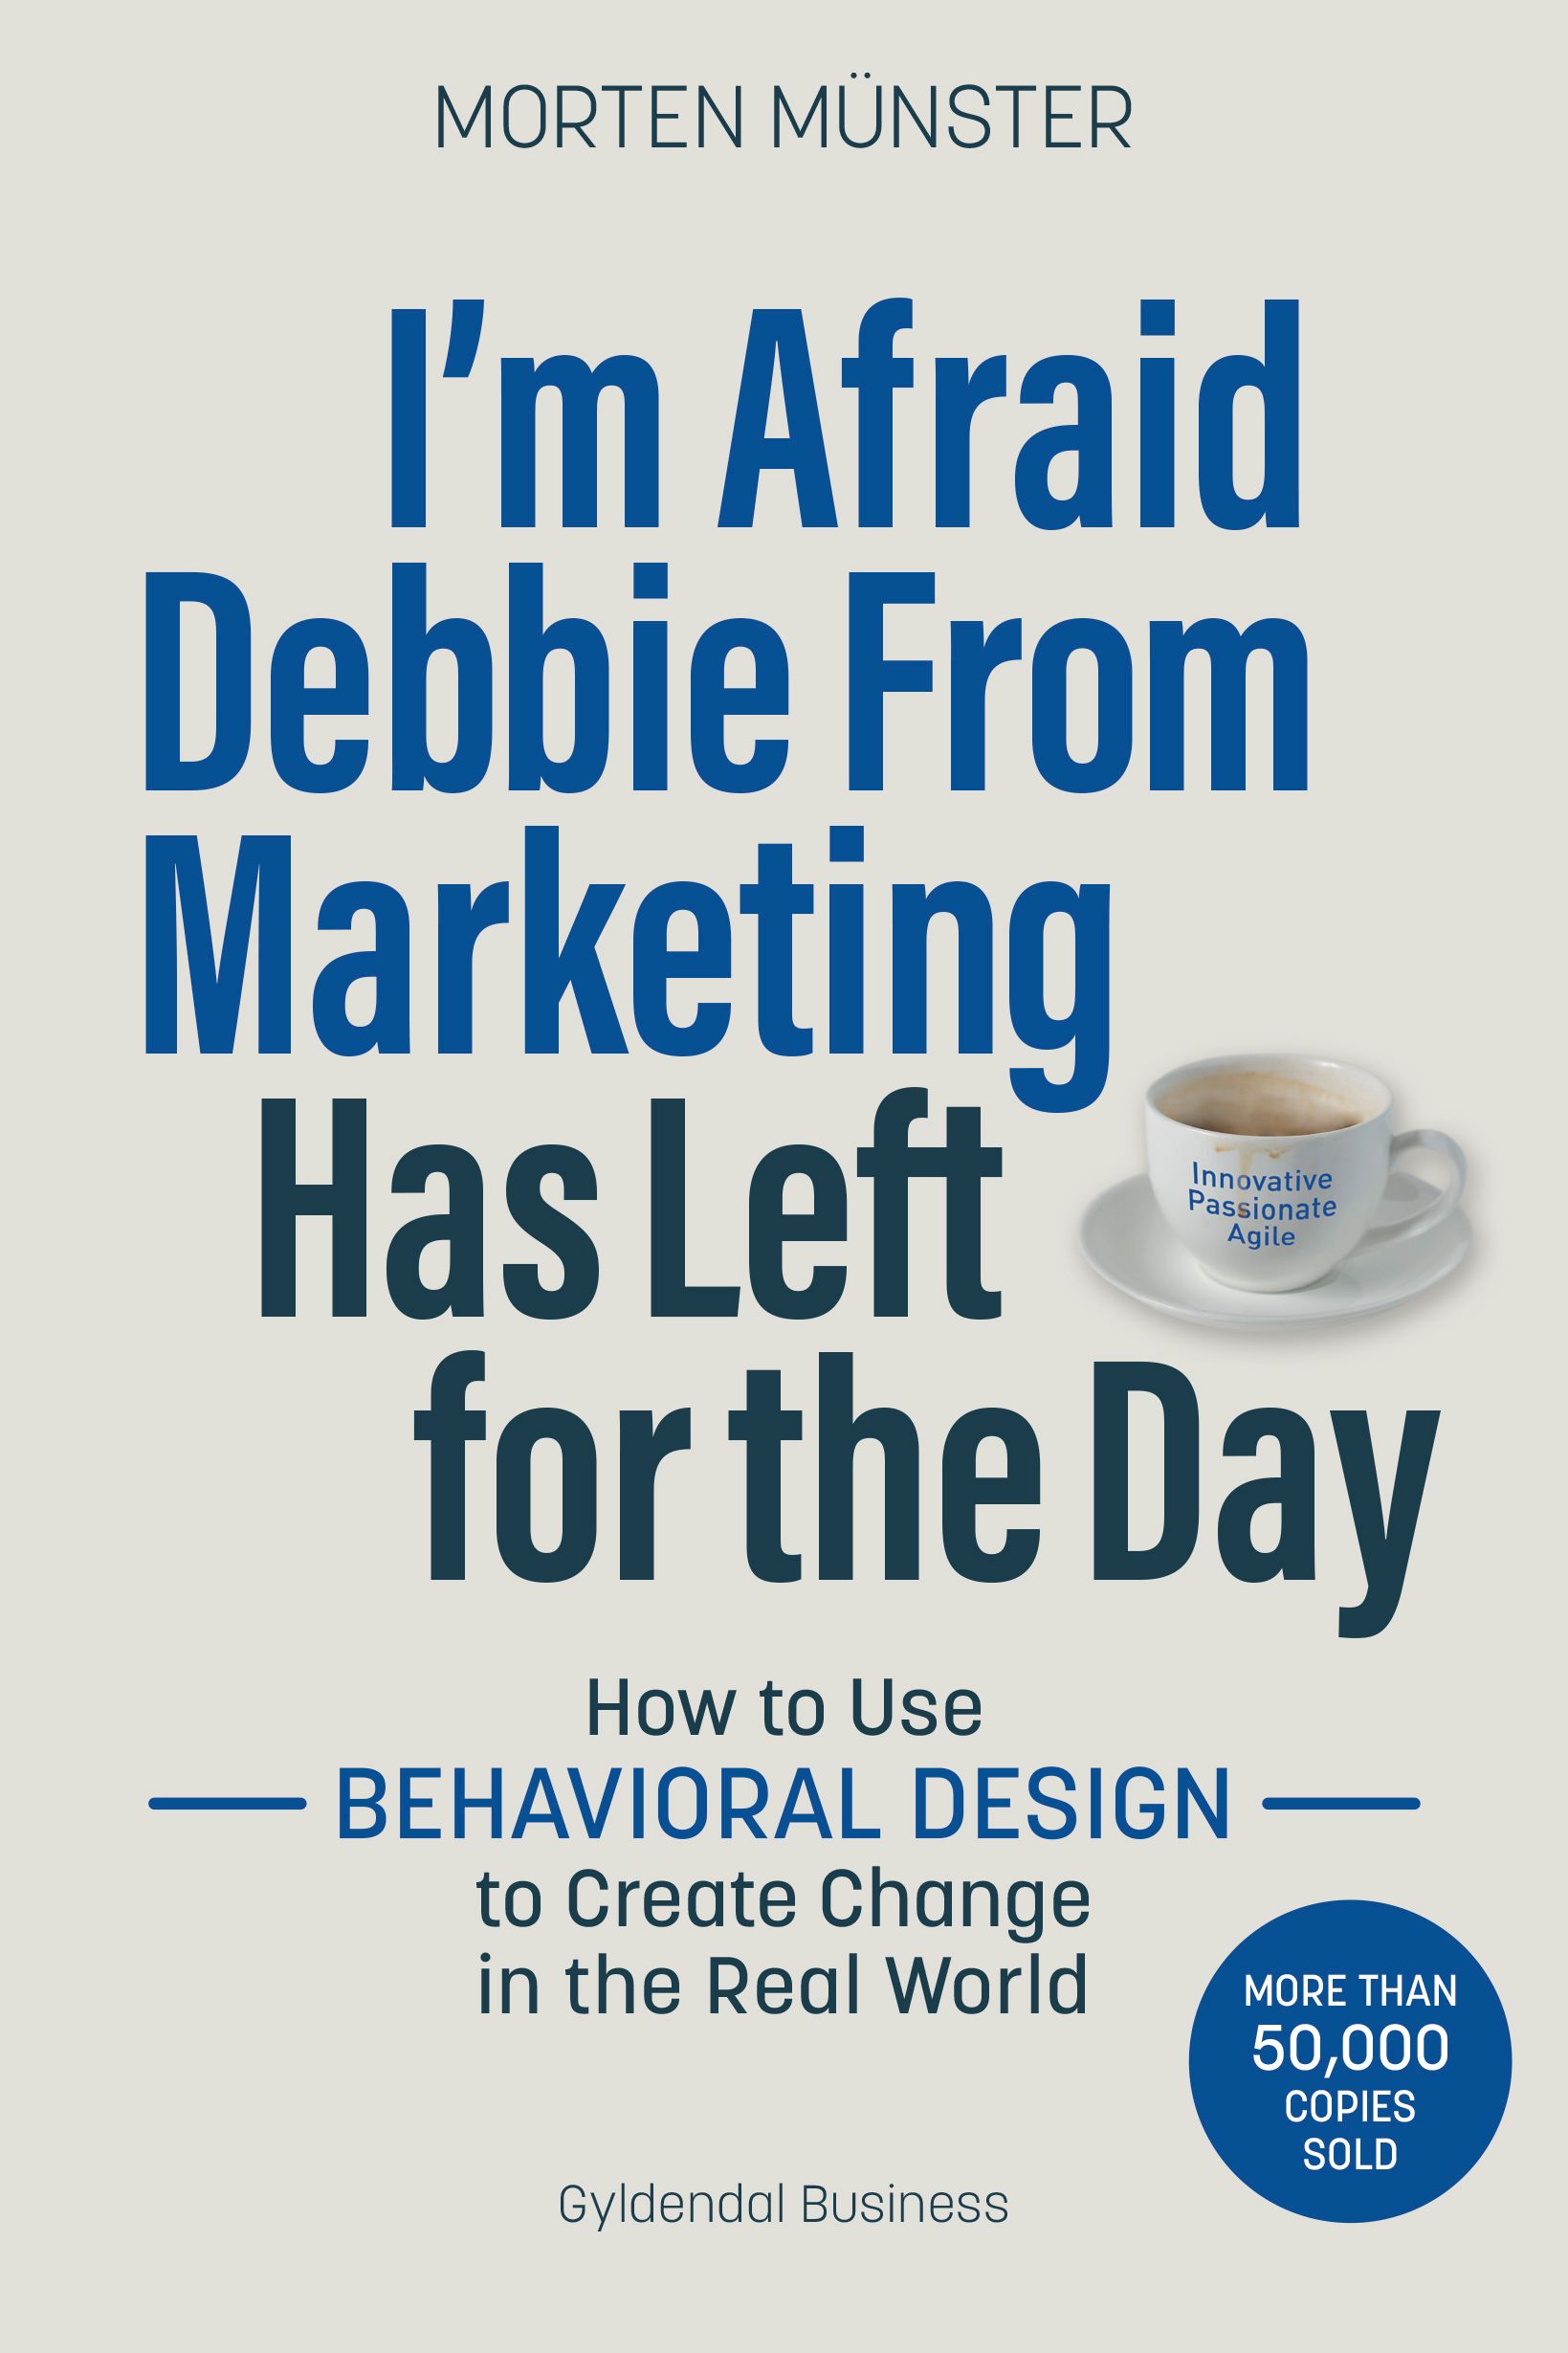 I'm Afraid Debbie From Marketing Has Left for the Day, eBook by Morten Münster